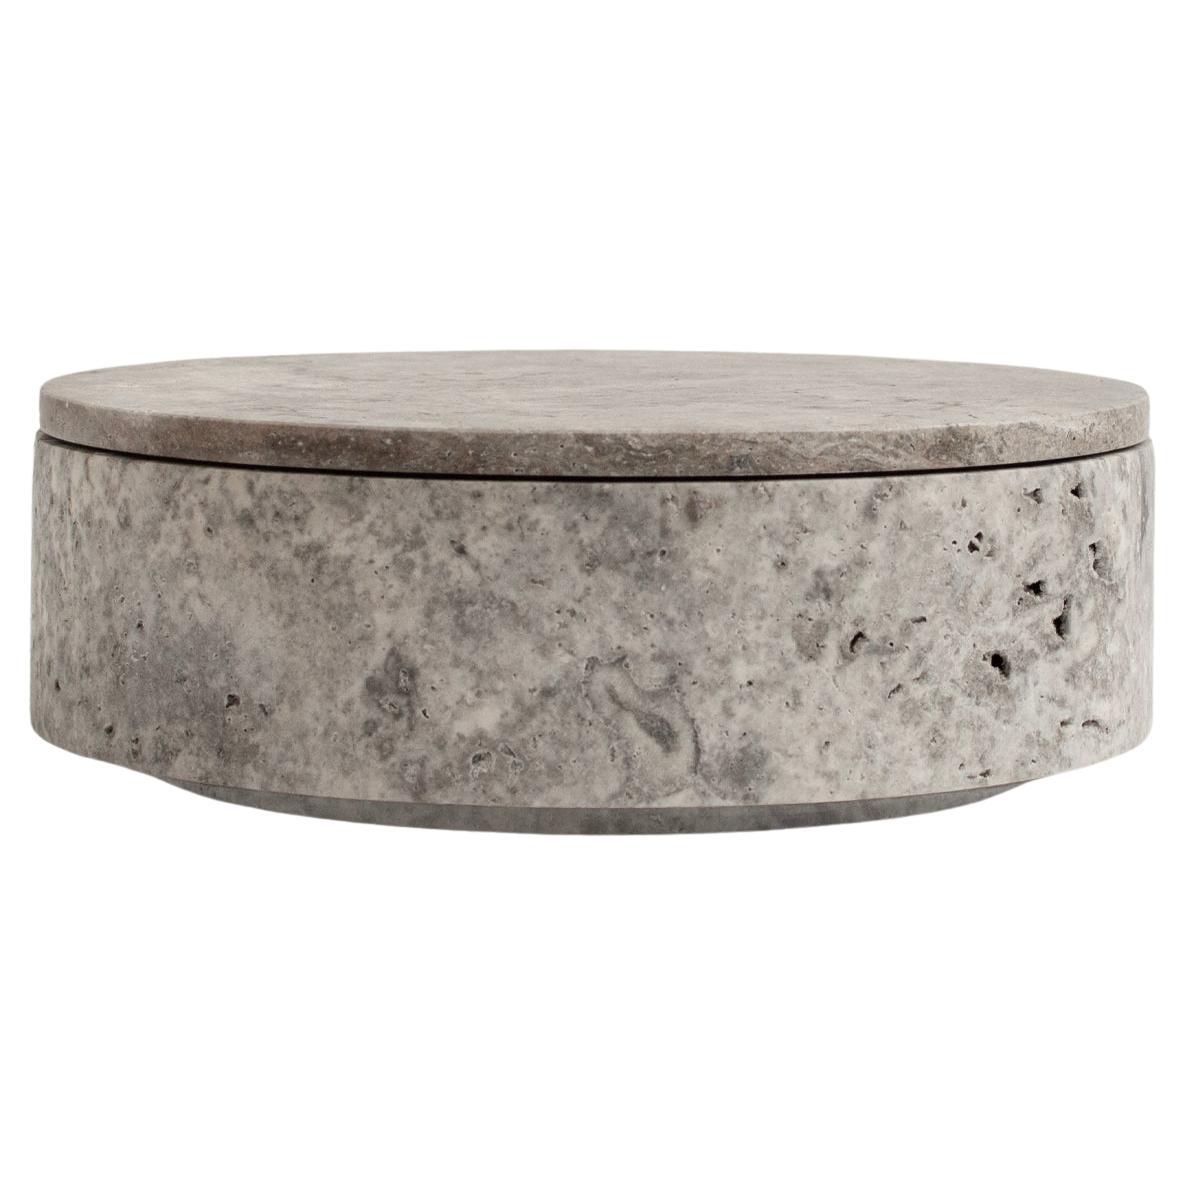 Silver Travertine Cylinder Bowl with Lid For Sale